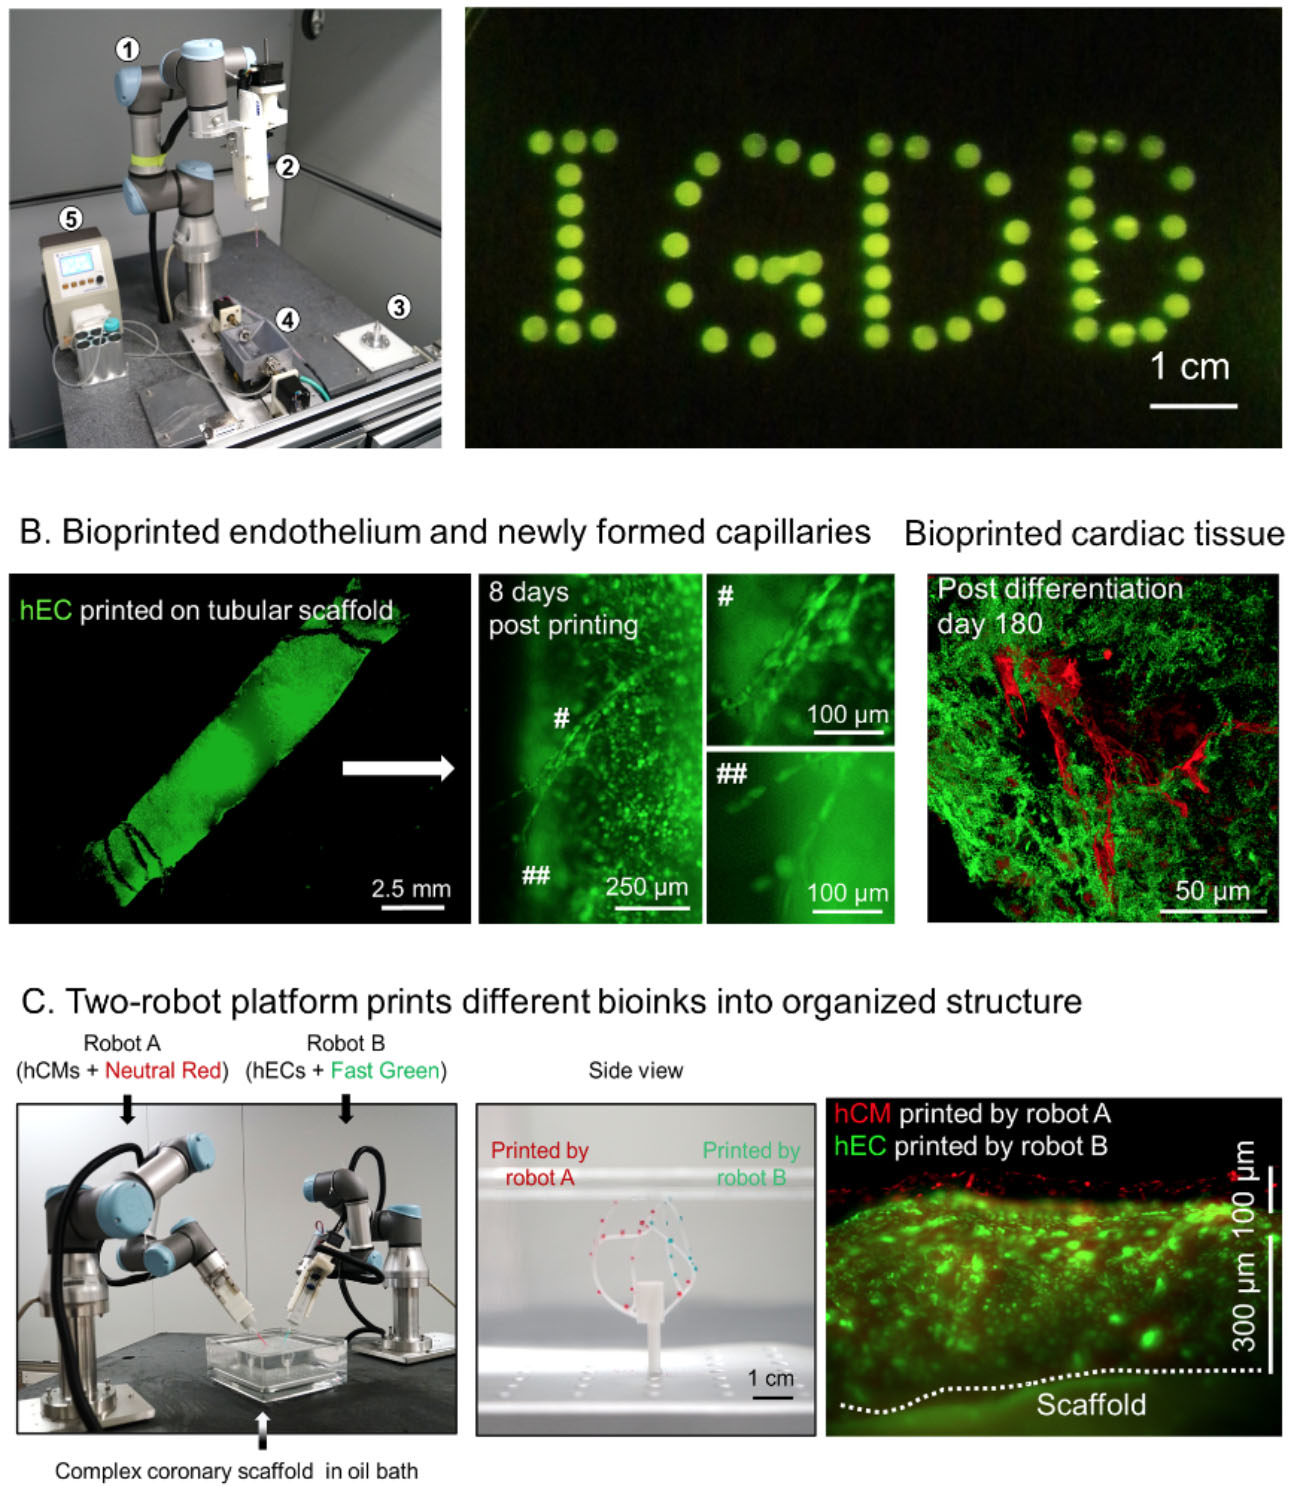 six-axis robot-based bioprinting system and its printing products